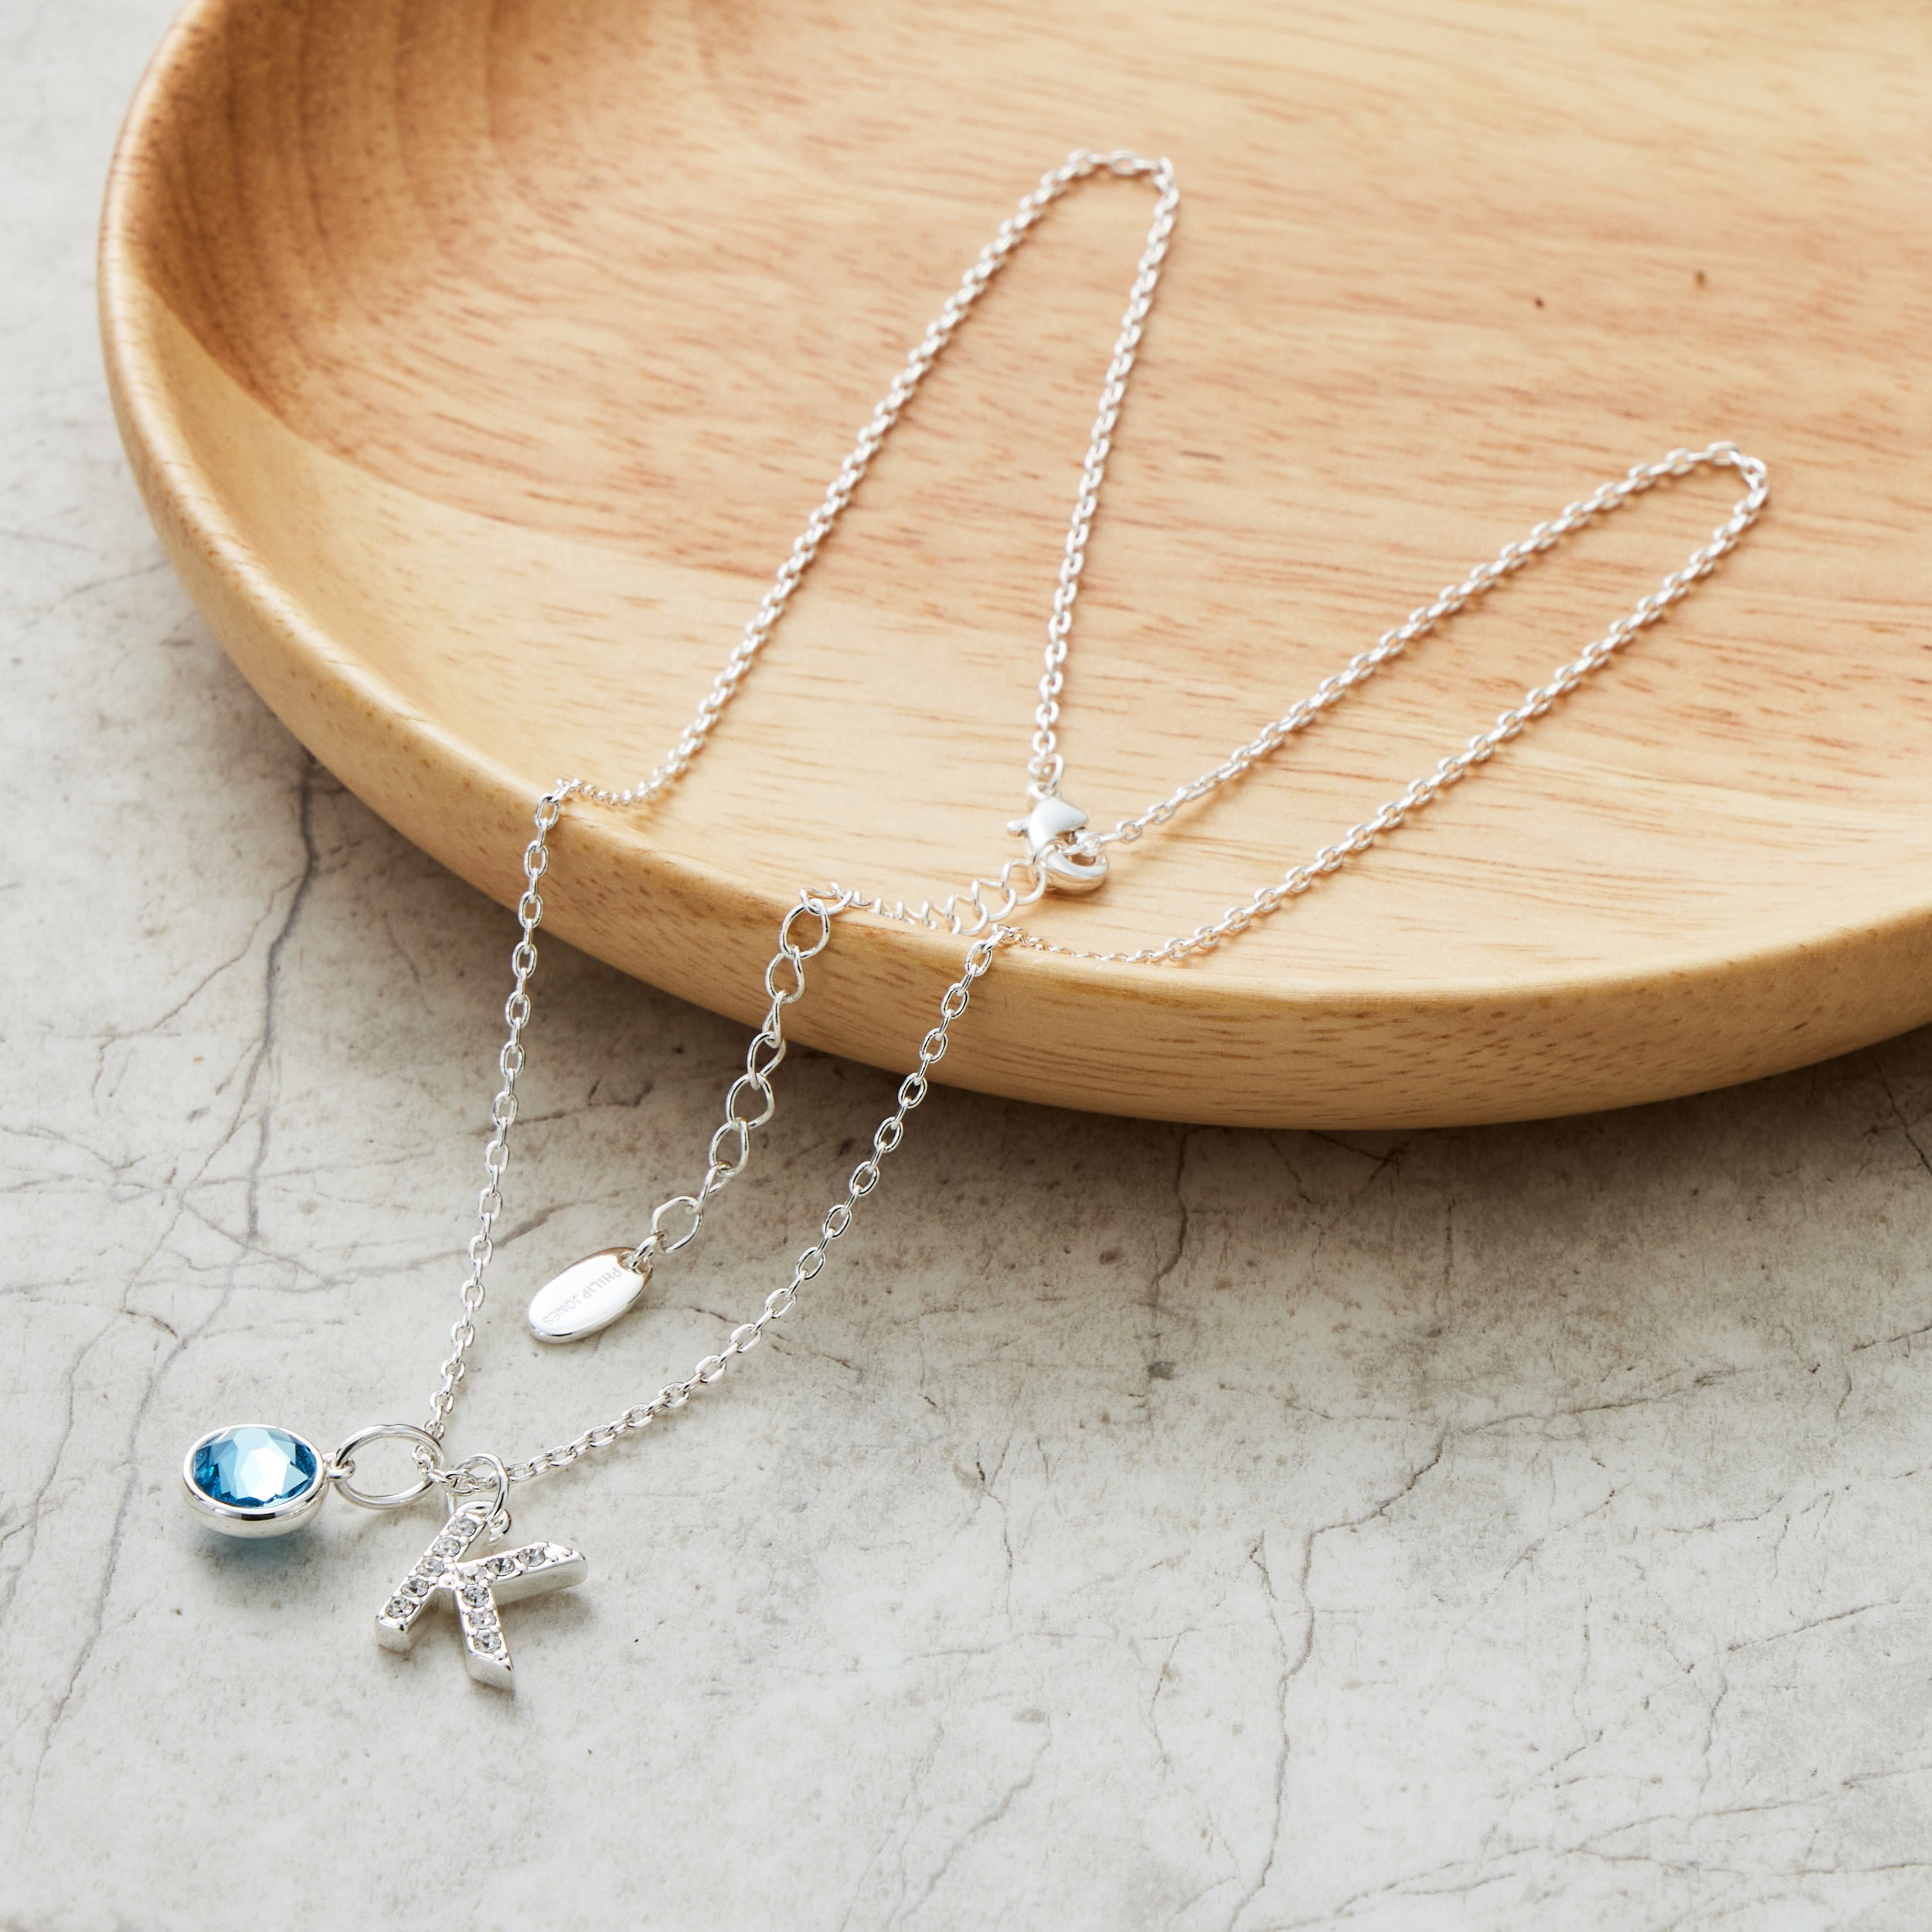 Pave Initial K Necklace with Birthstone Charm Created with Zircondia® Crystals